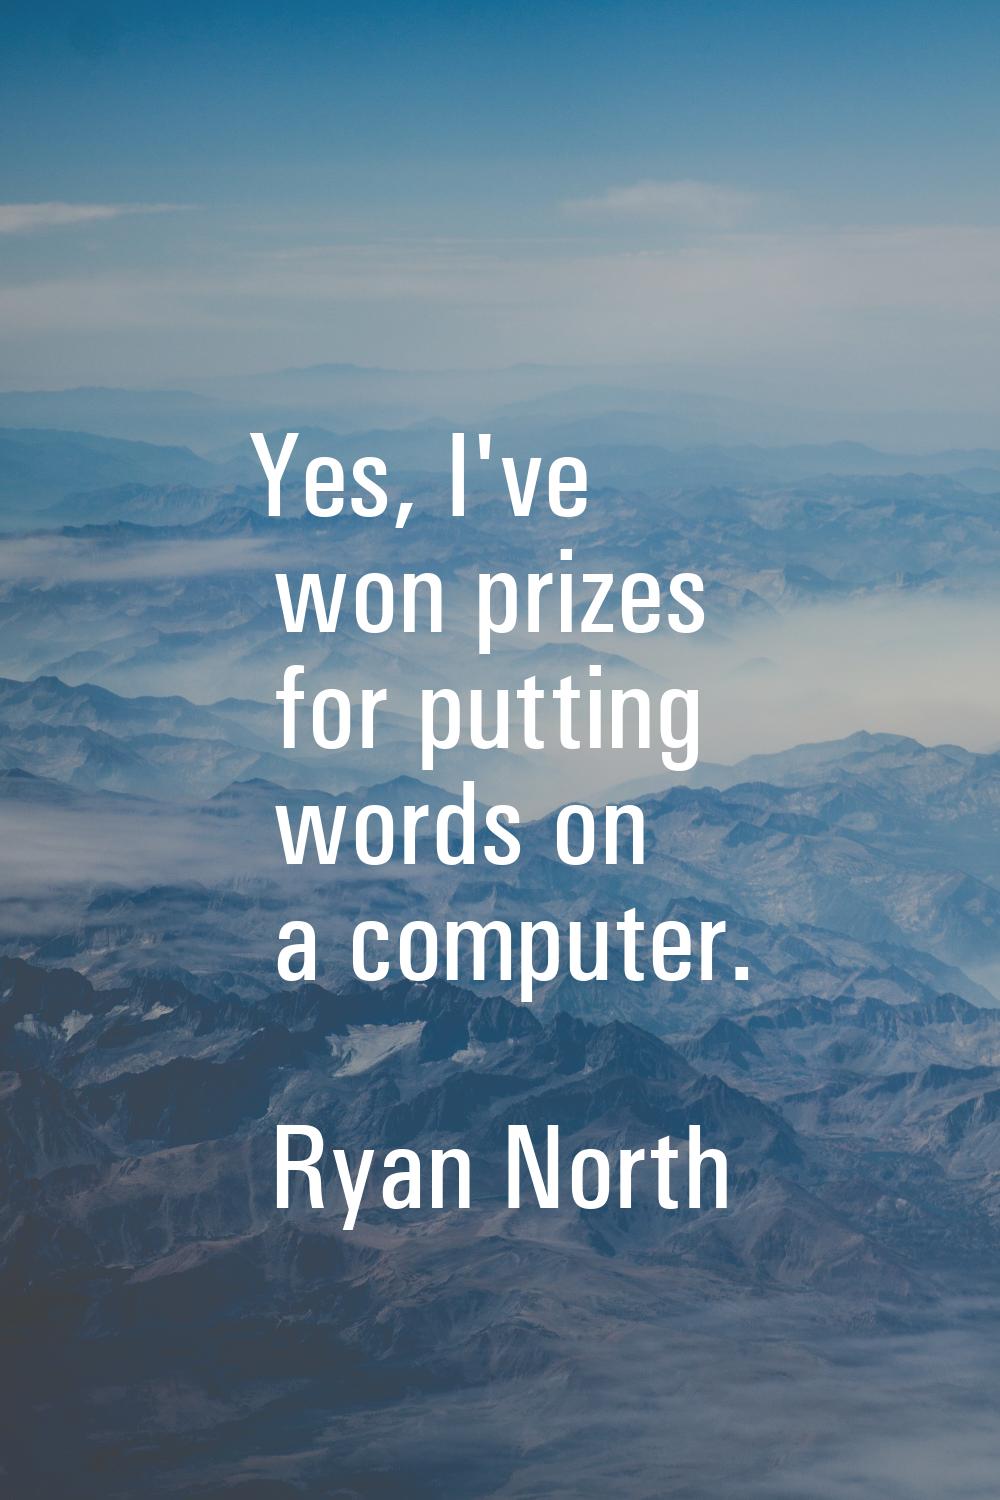 Yes, I've won prizes for putting words on a computer.